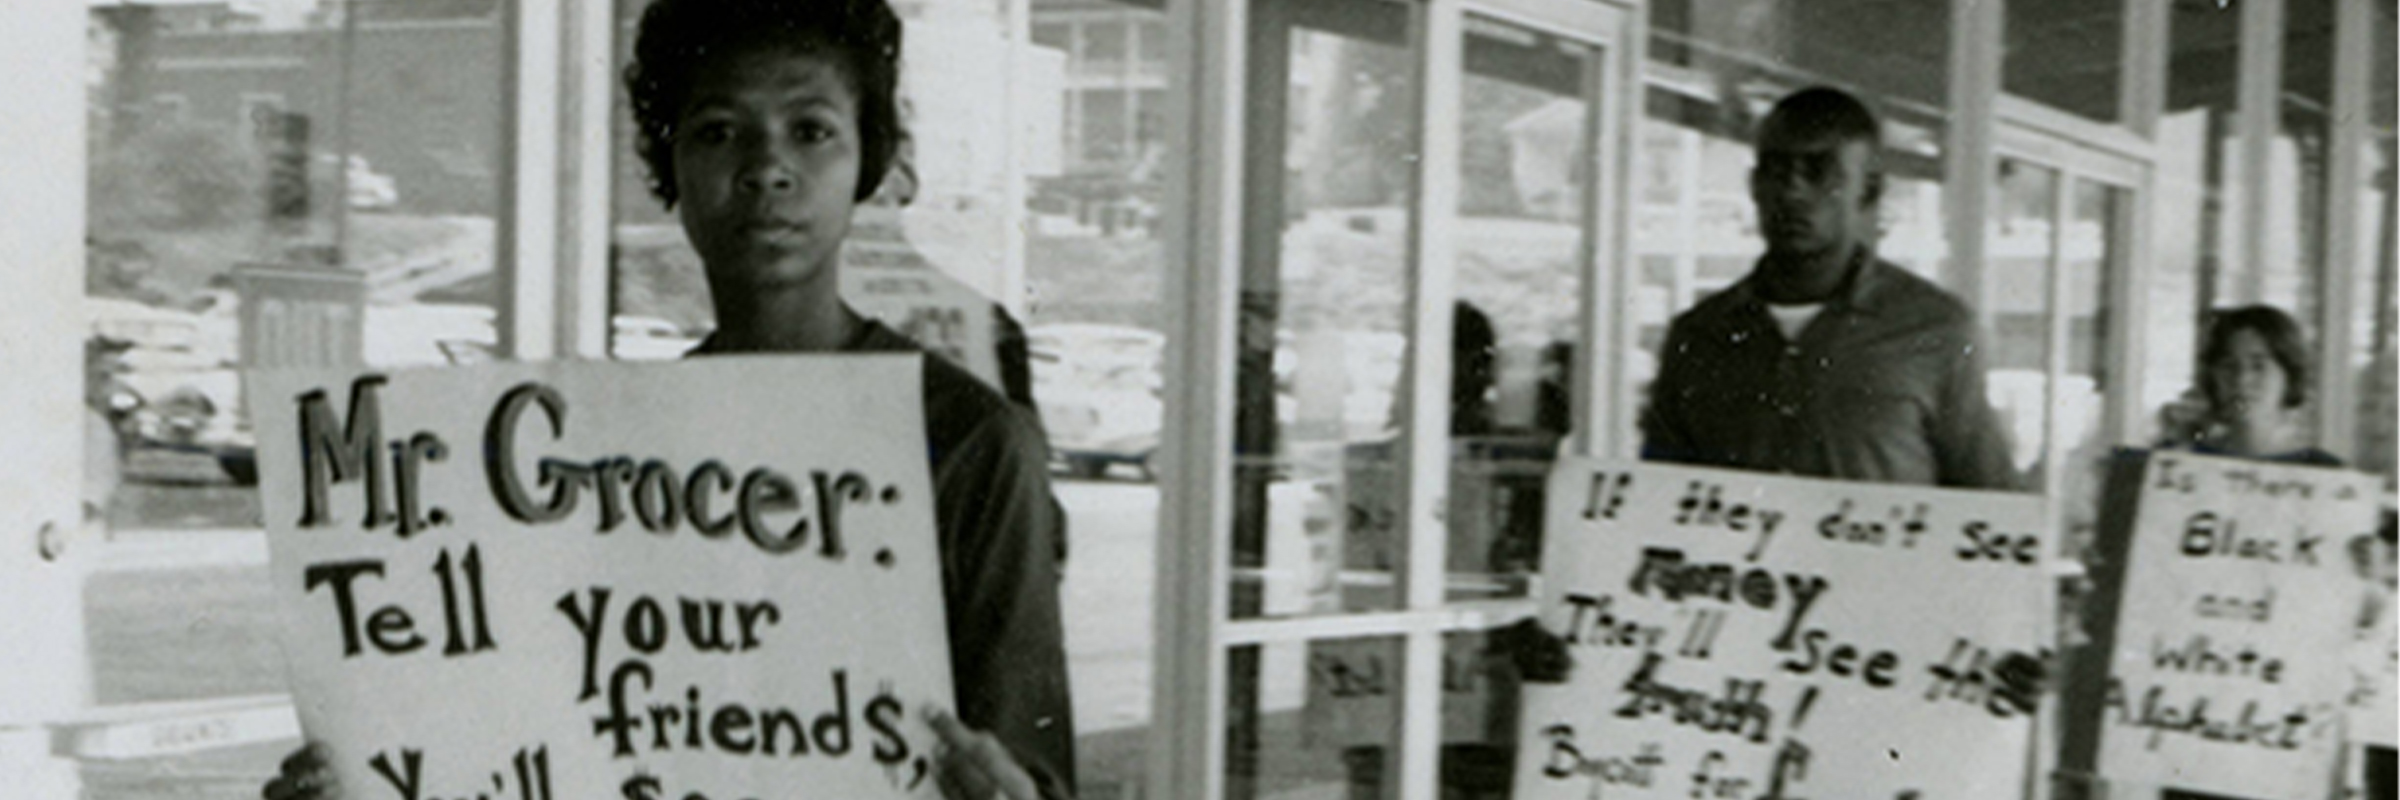 Protesters at Grants, Farmville Shopping Center, August 1963. Students carry signs opposing racial segregation, and encouraging shoppers to boycott businesses that support discriminatory practices.